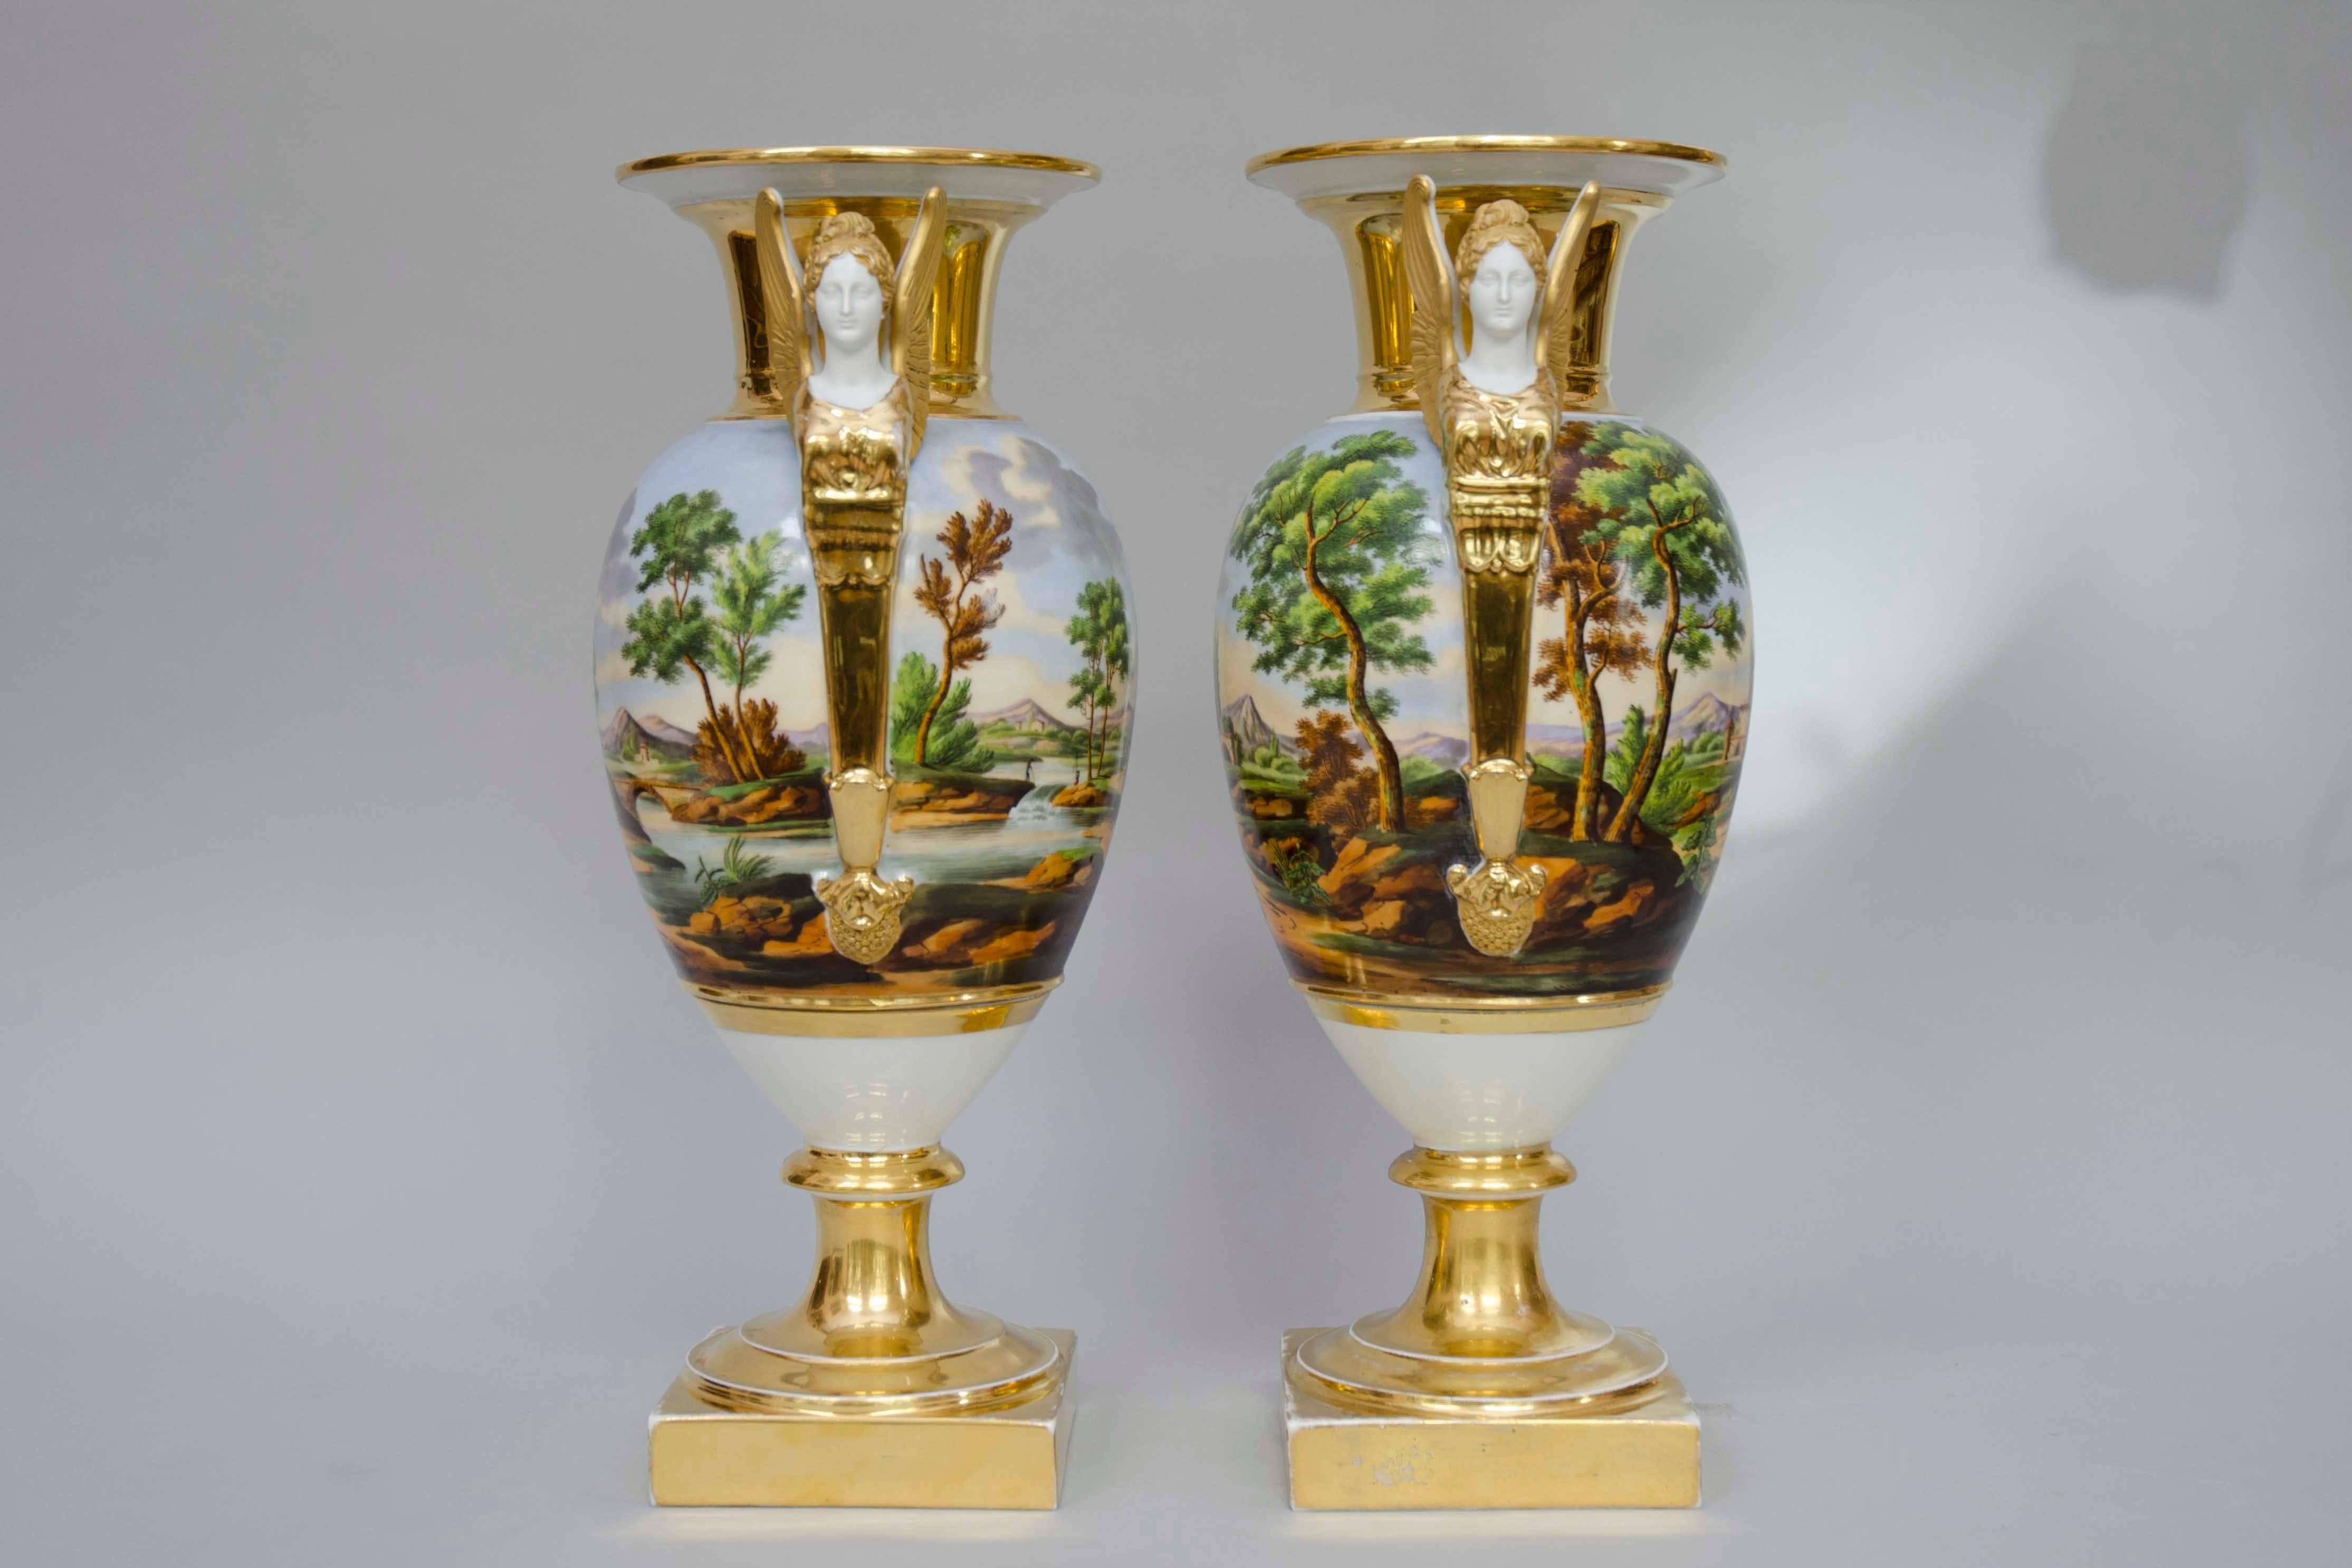 Empire Early 19th Century Pair of Large Egg Shaped Vases, Italian Landscapes, Paris For Sale